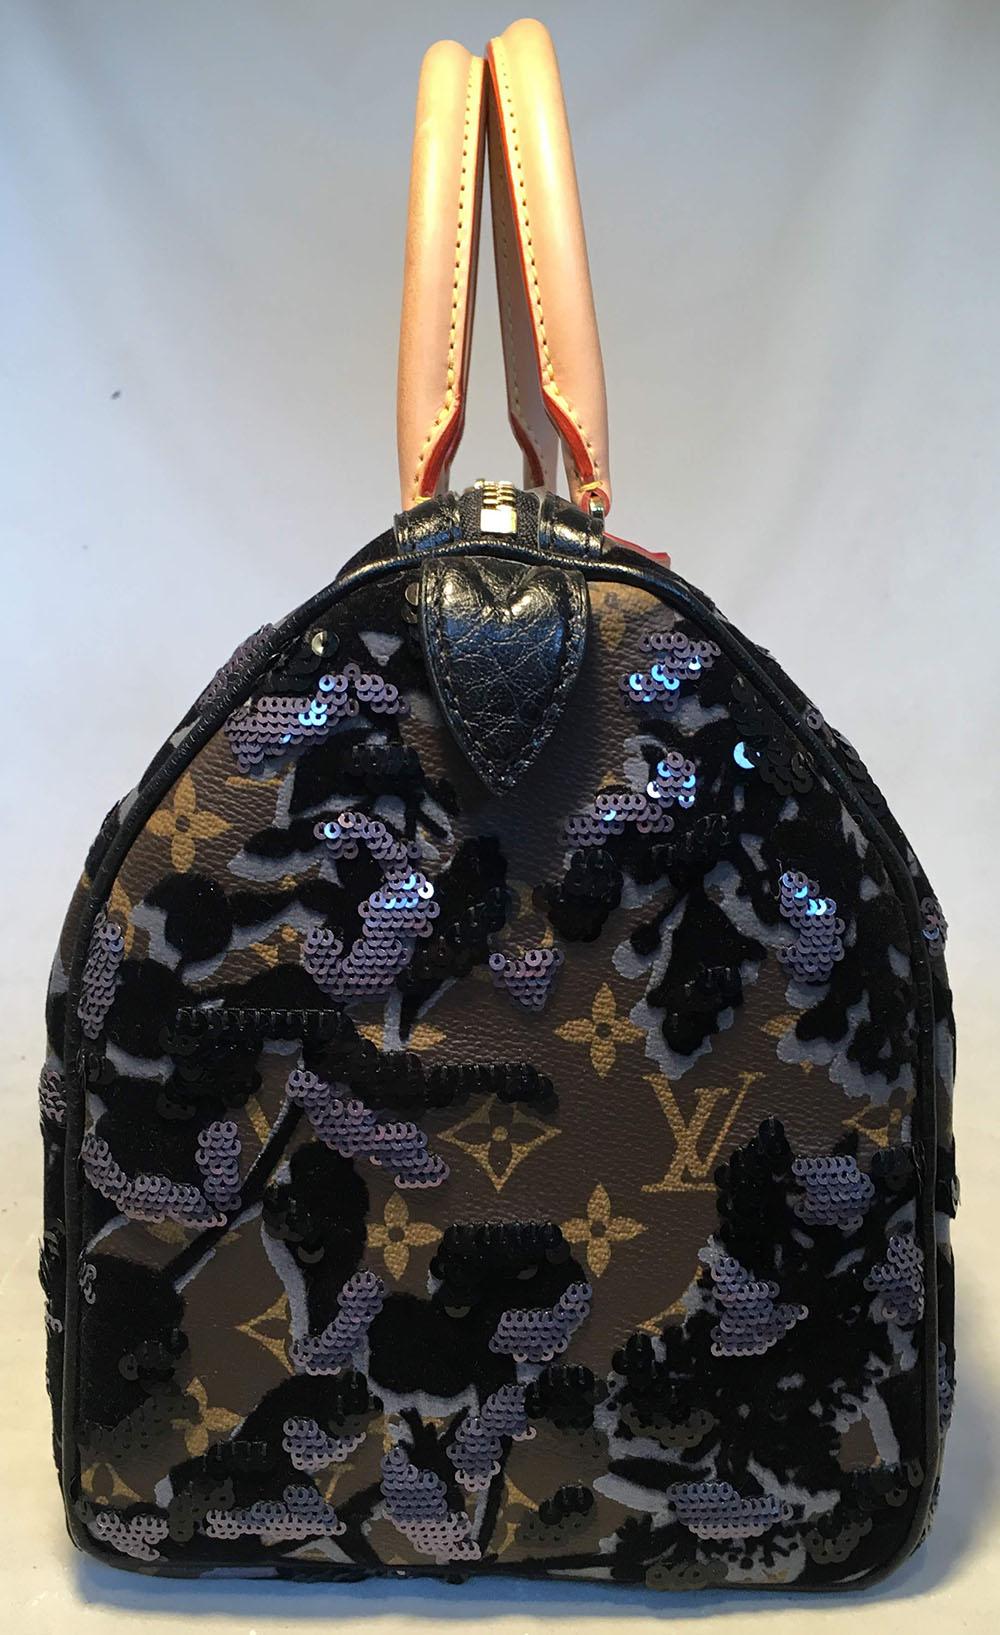 Limited Edition Louis Vuitton Fleur de Jais Sequin Monogram Speedy 30 in excellent condition. Signature monogram canvas exterior embroidered with black and gray paillette sequins, shadowed by black velvet and grey paint. Tan leather and brass